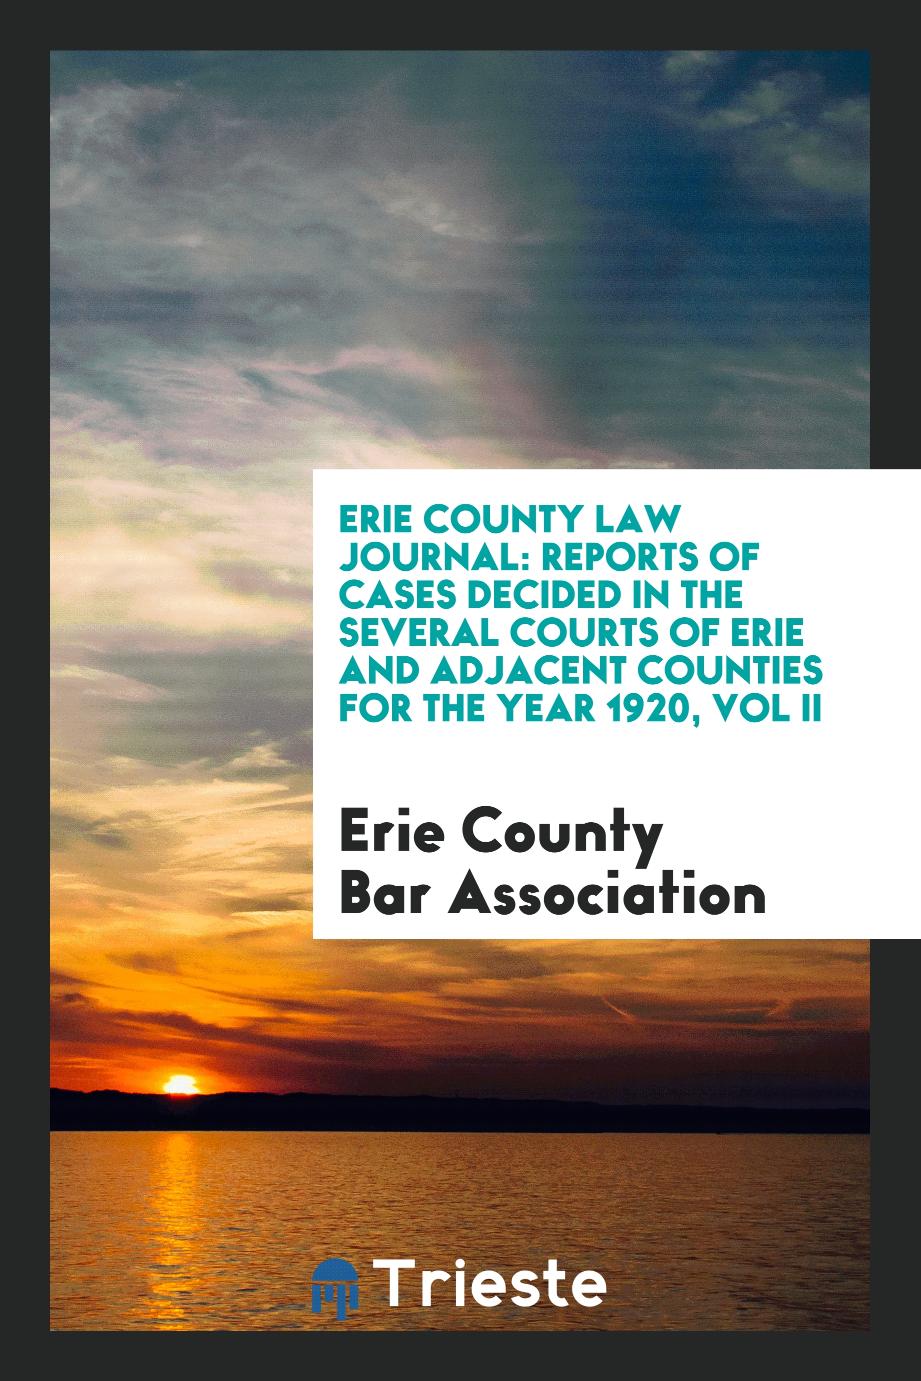 Erie County Law Journal: Reports of Cases Decided in the Several Courts of Erie and Adjacent Counties for the Year 1920, Vol II